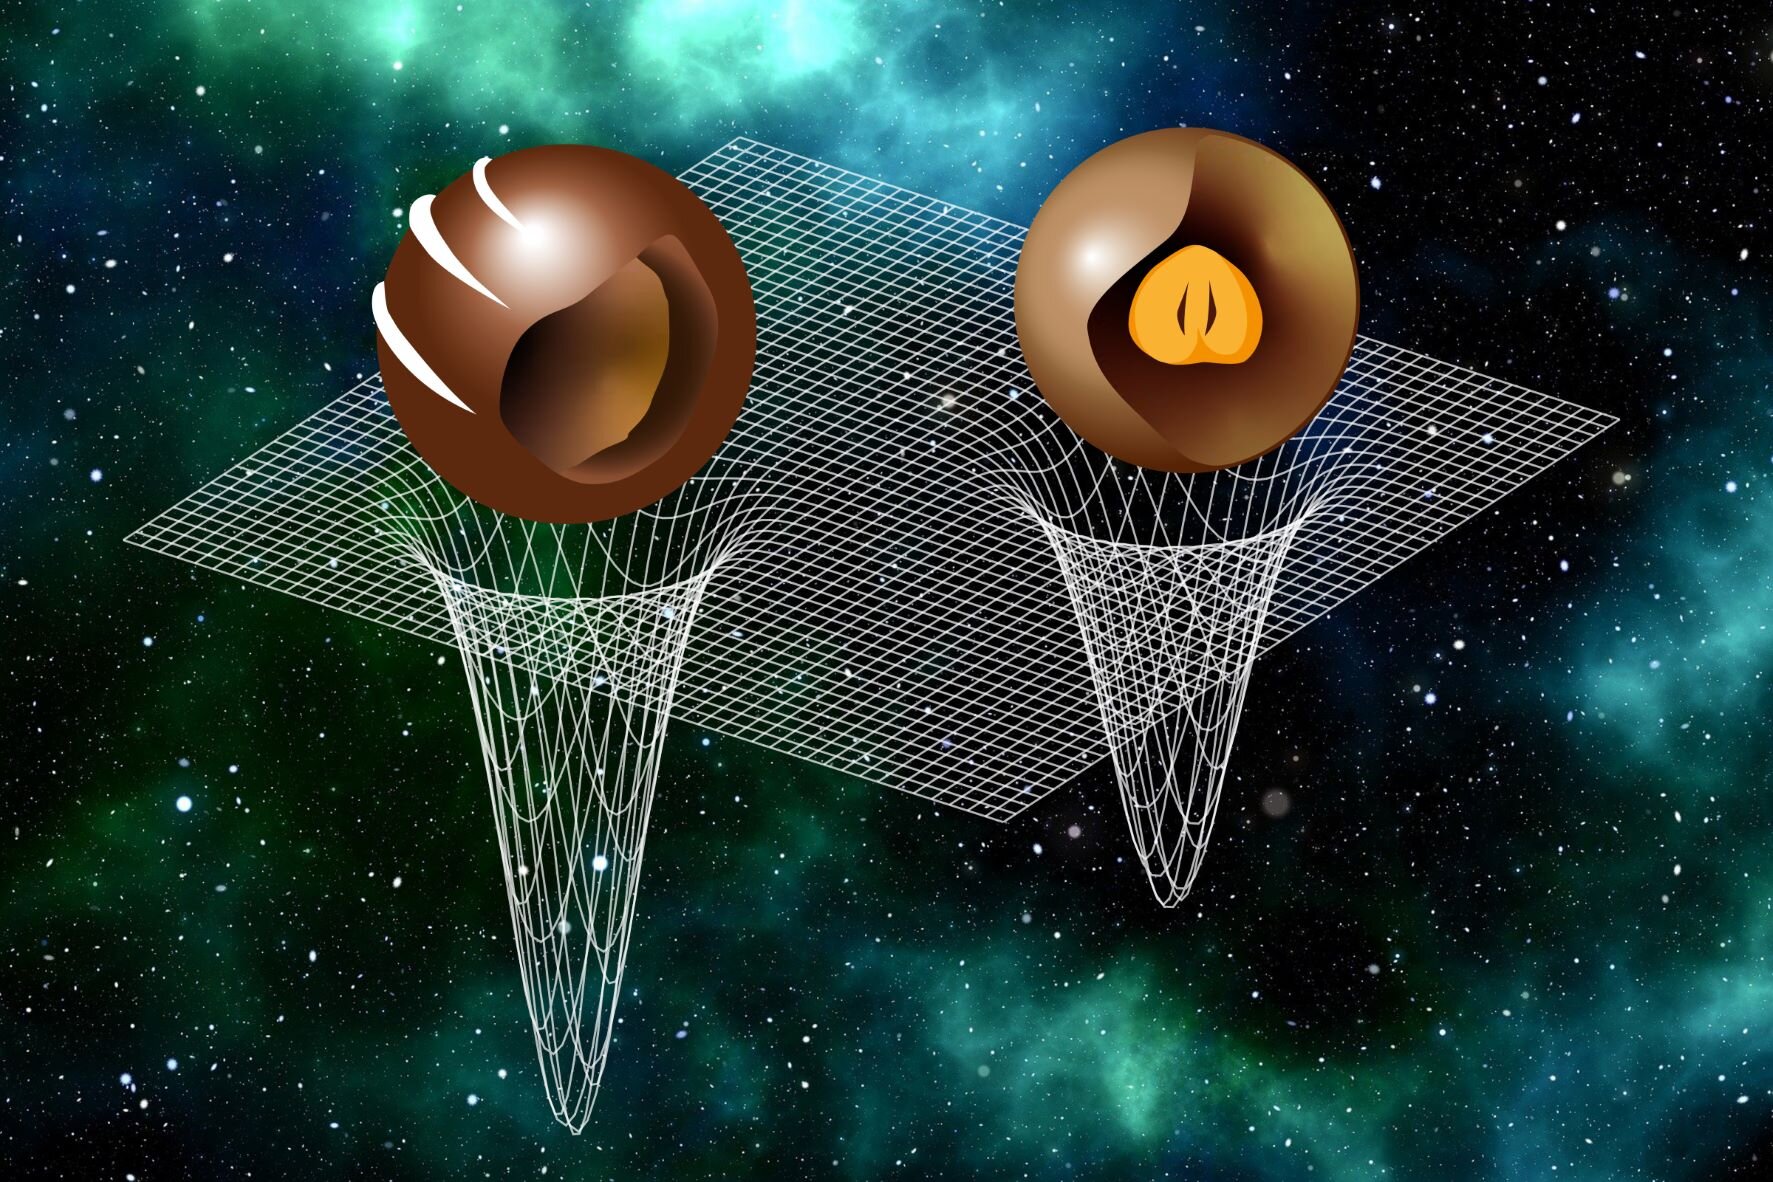 Cosmic chocolate pralines? General neutron star structure revealed